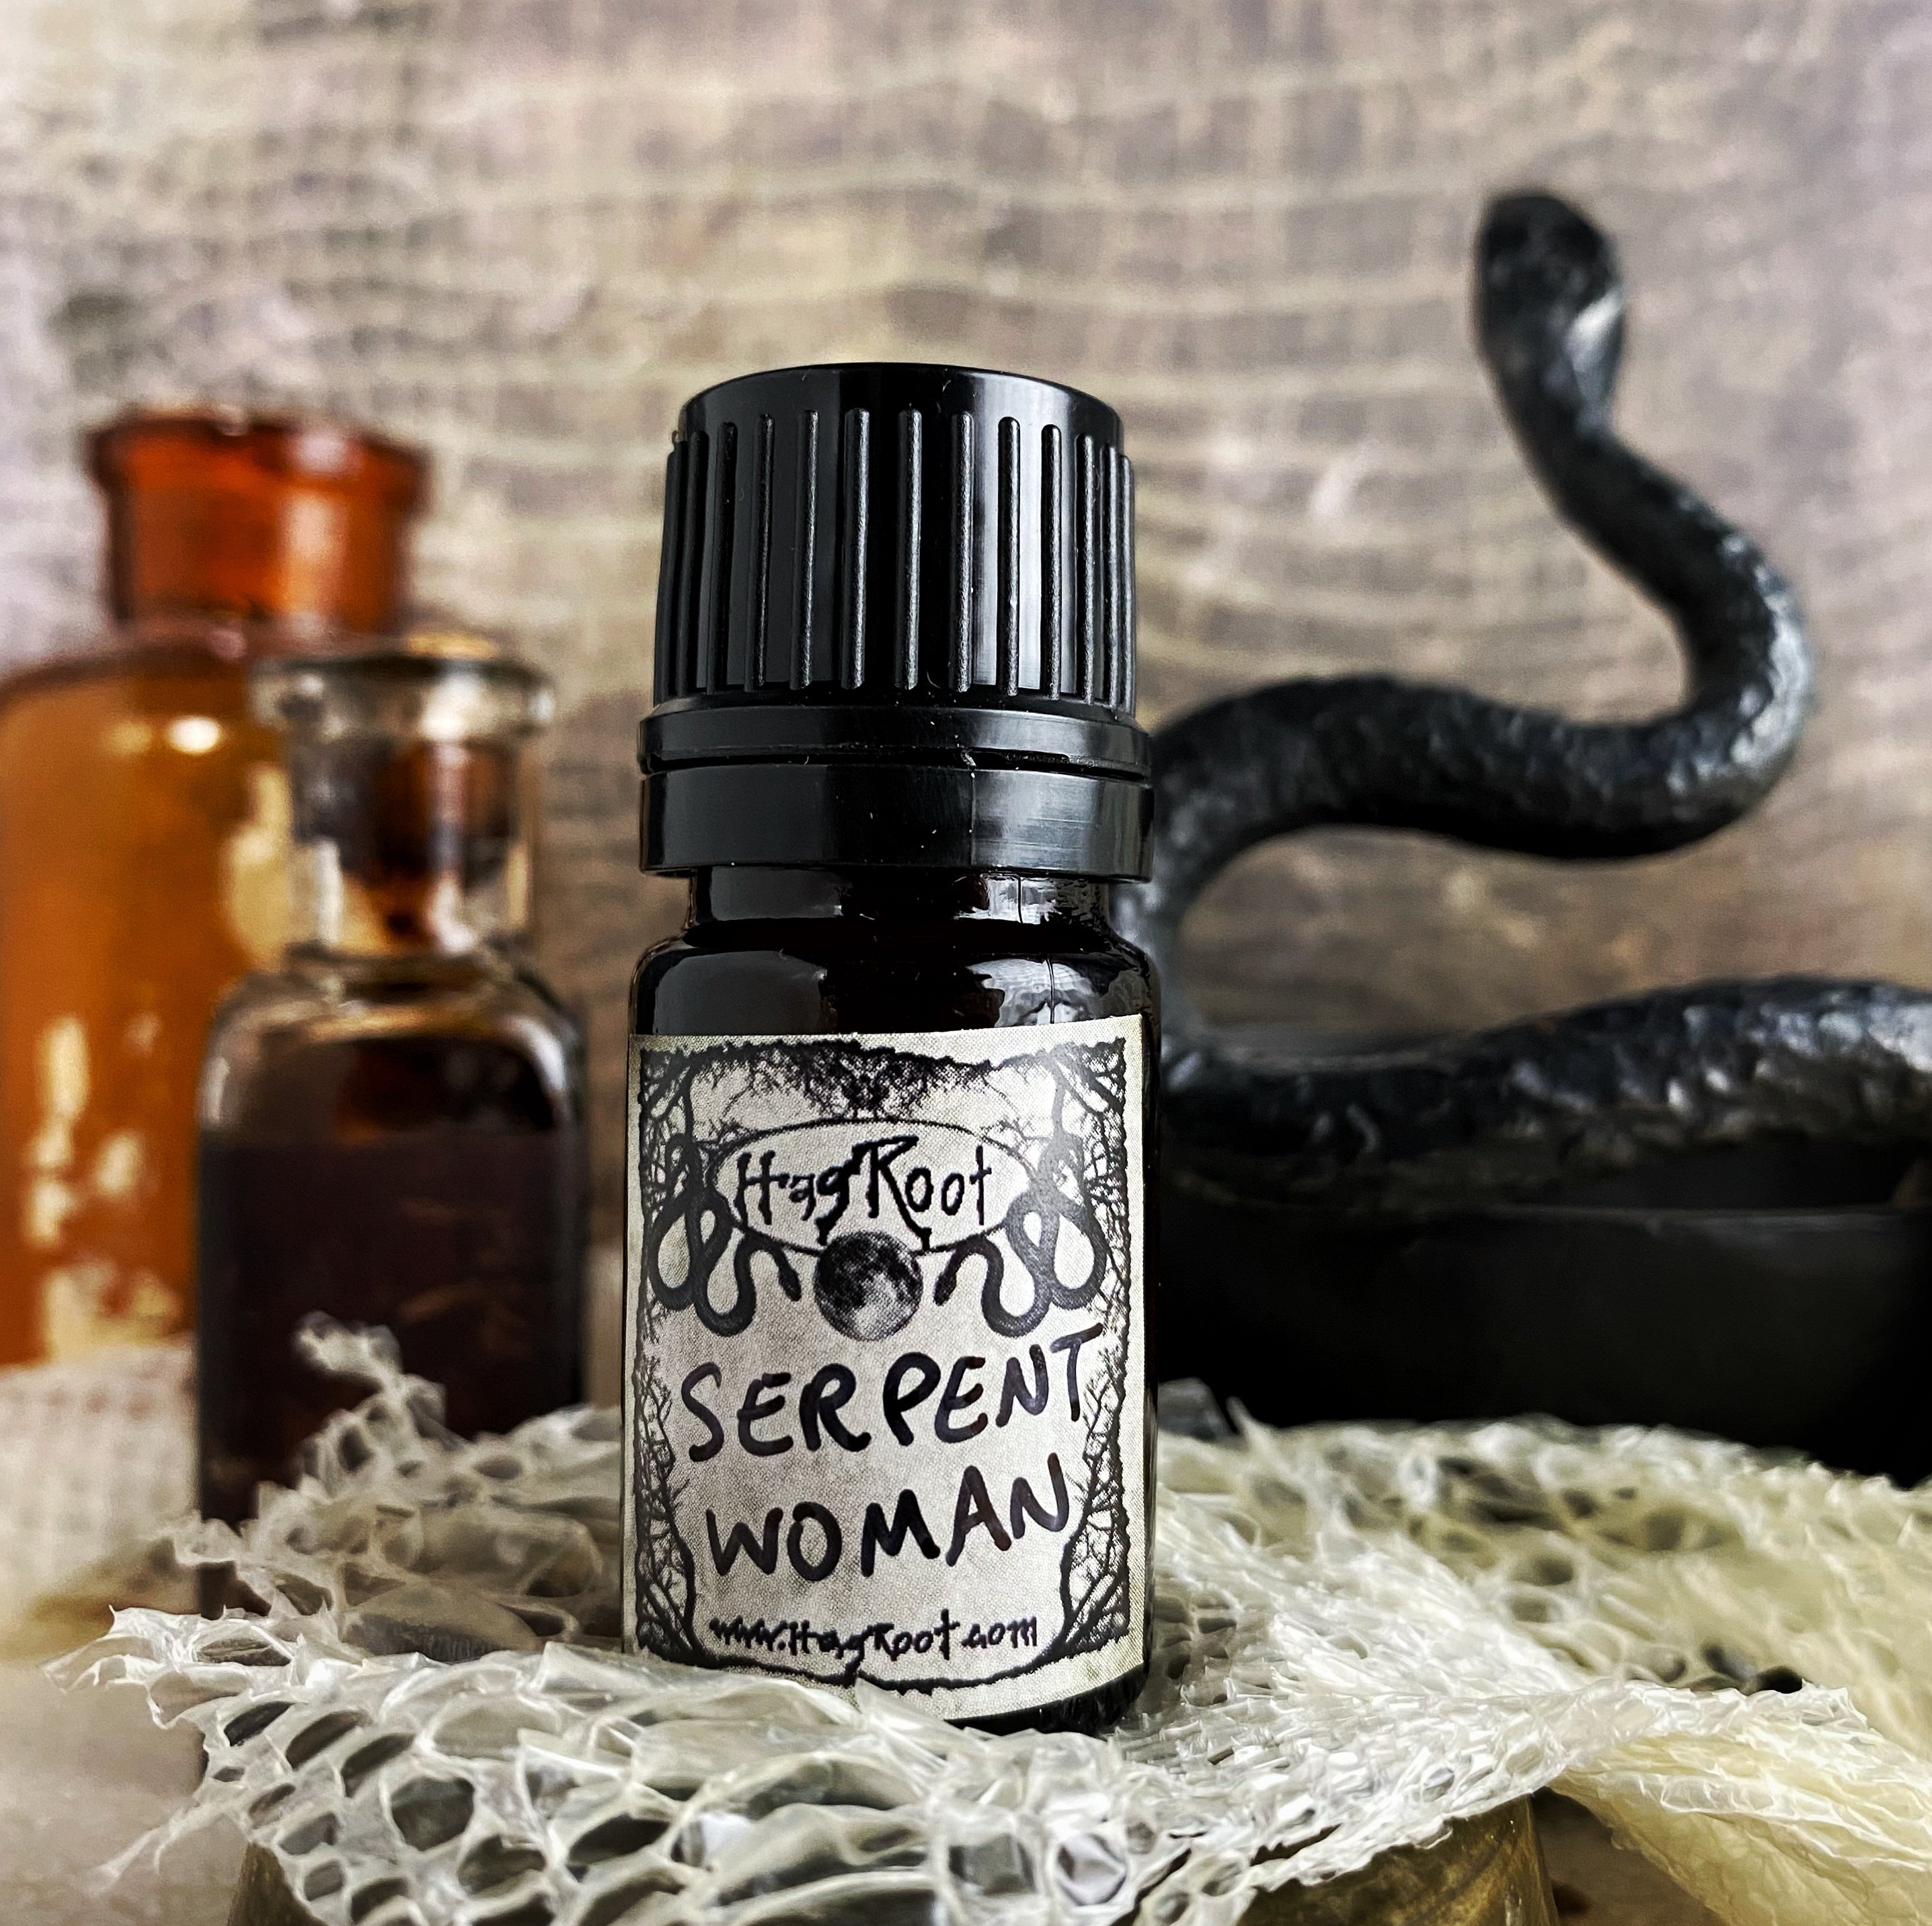 SERPENT WOMAN-(Amber, Birch, Cacao, Fir, Clove, Patchouli, Sugar Cane)-Perfume, Cologne, Anointing, Ritual Oil